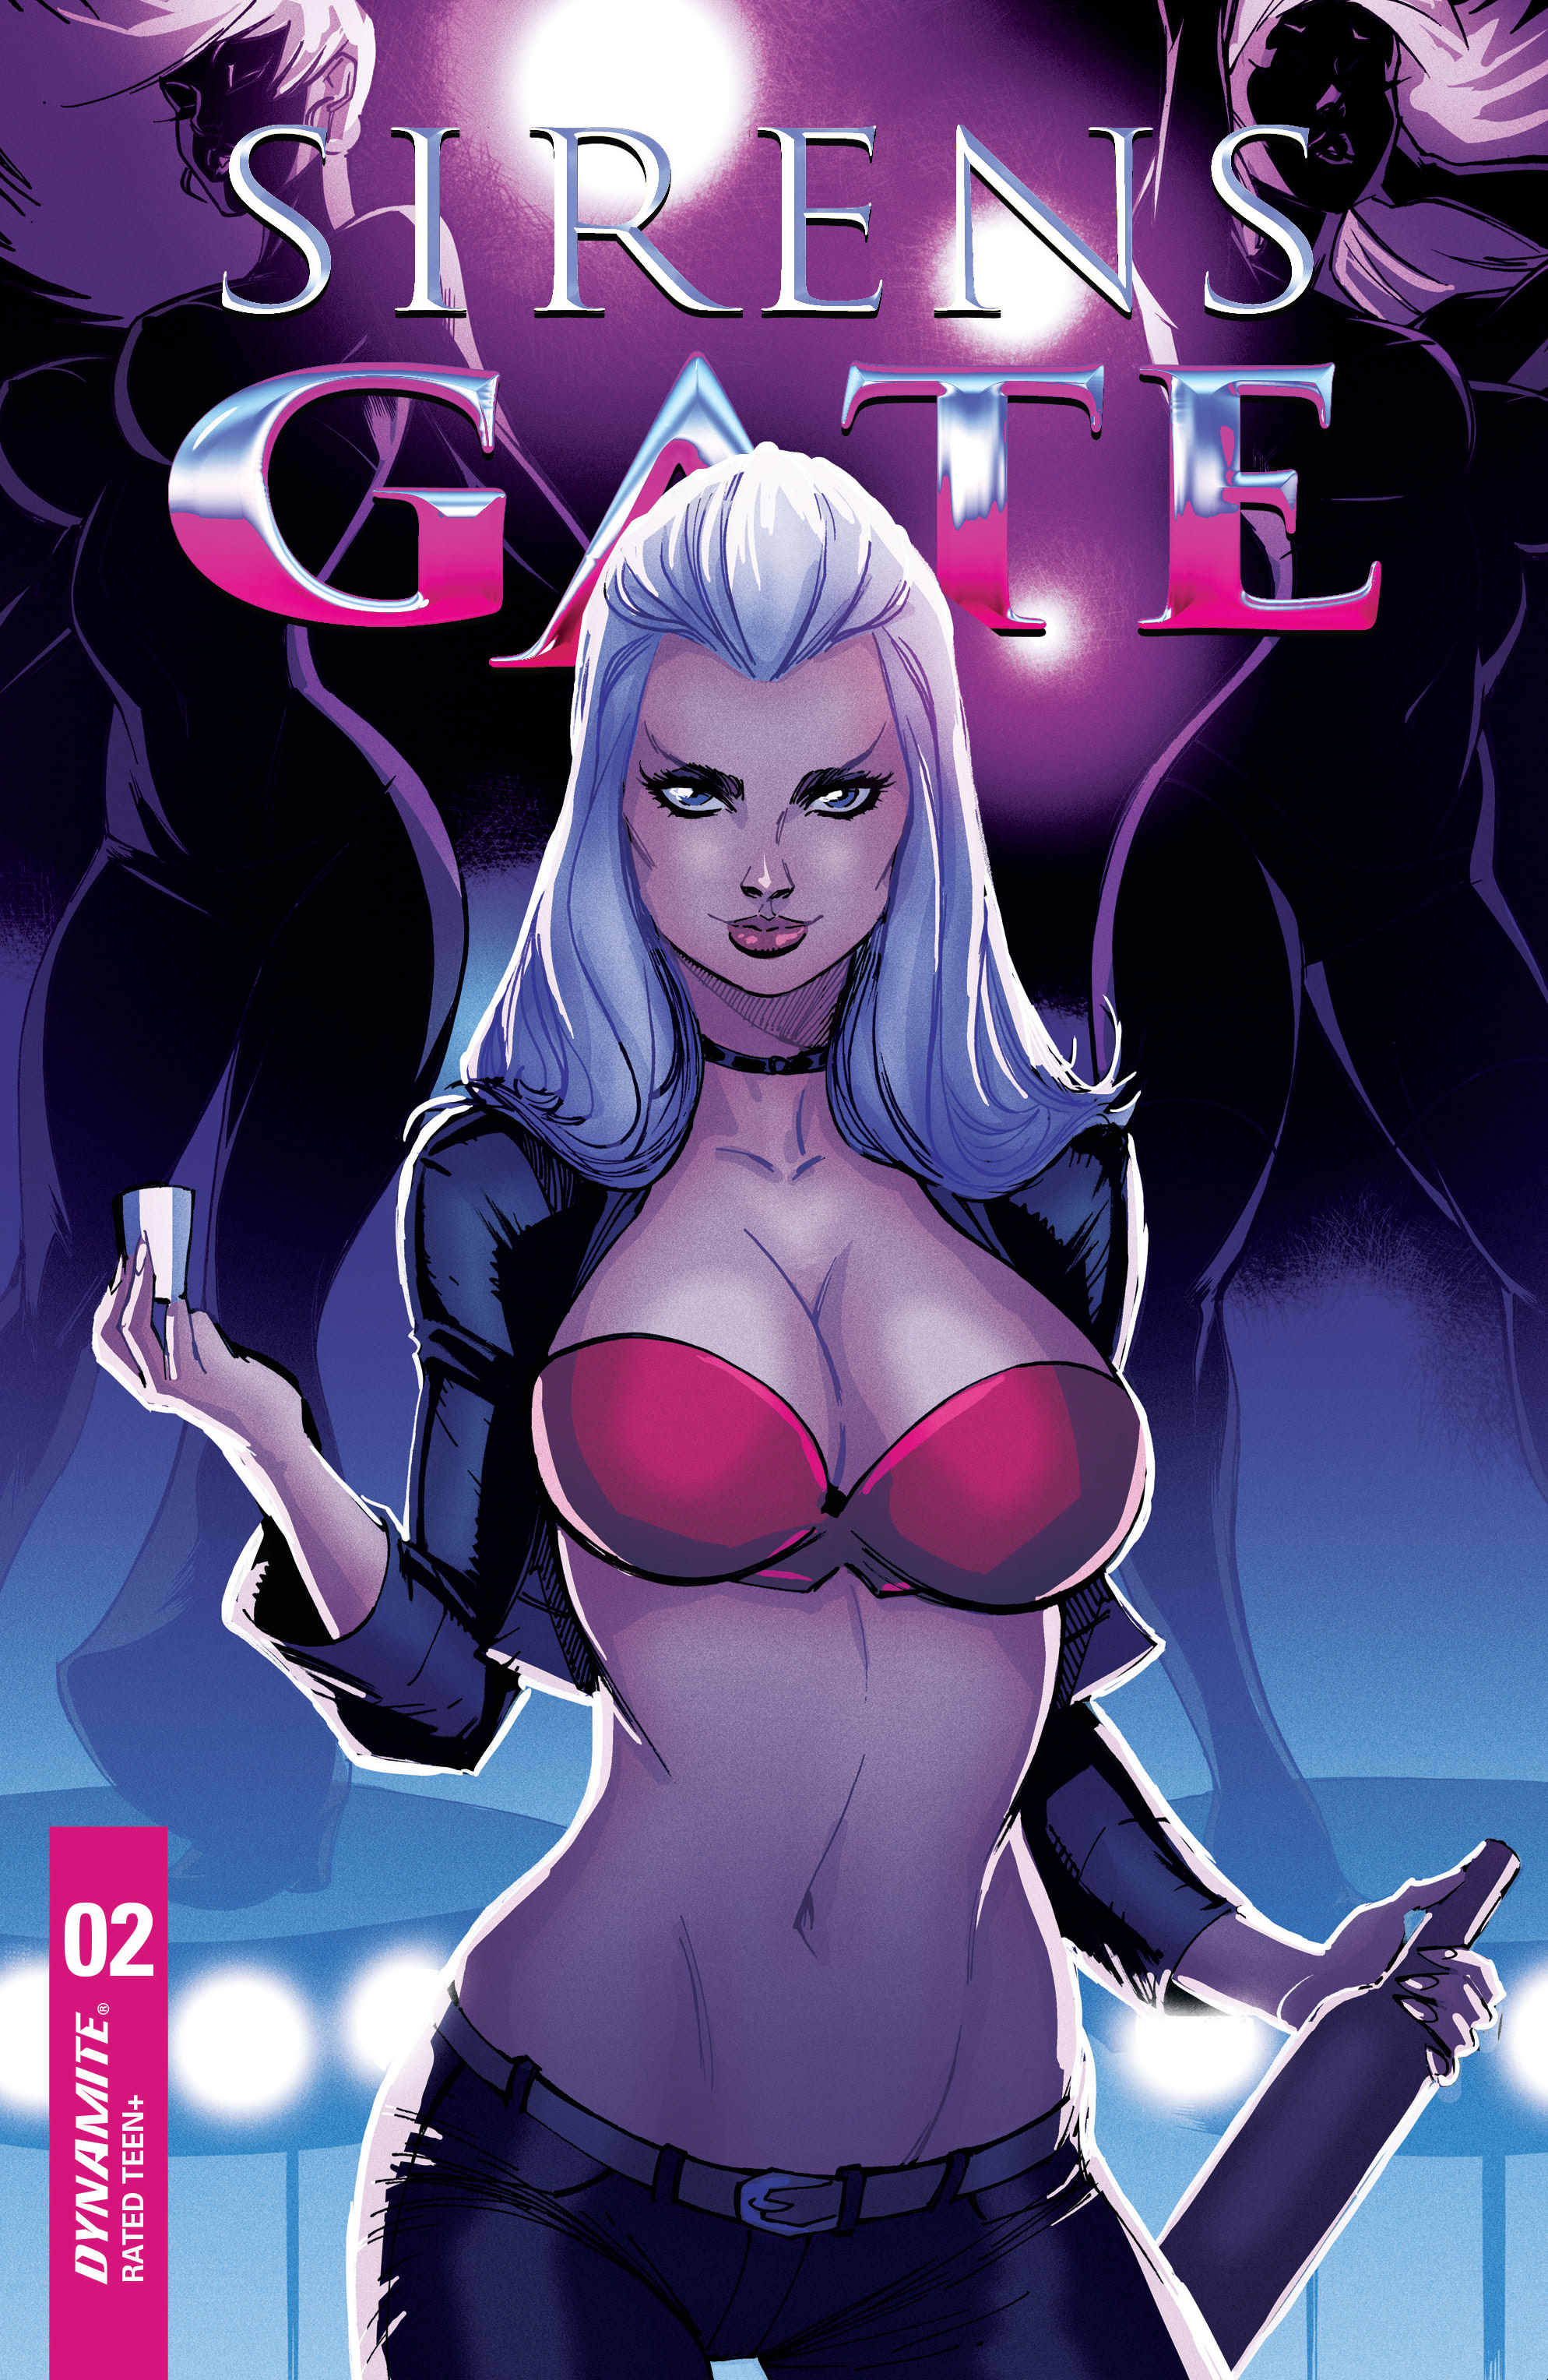 Read online Sirens Gate comic -  Issue #2 - 4